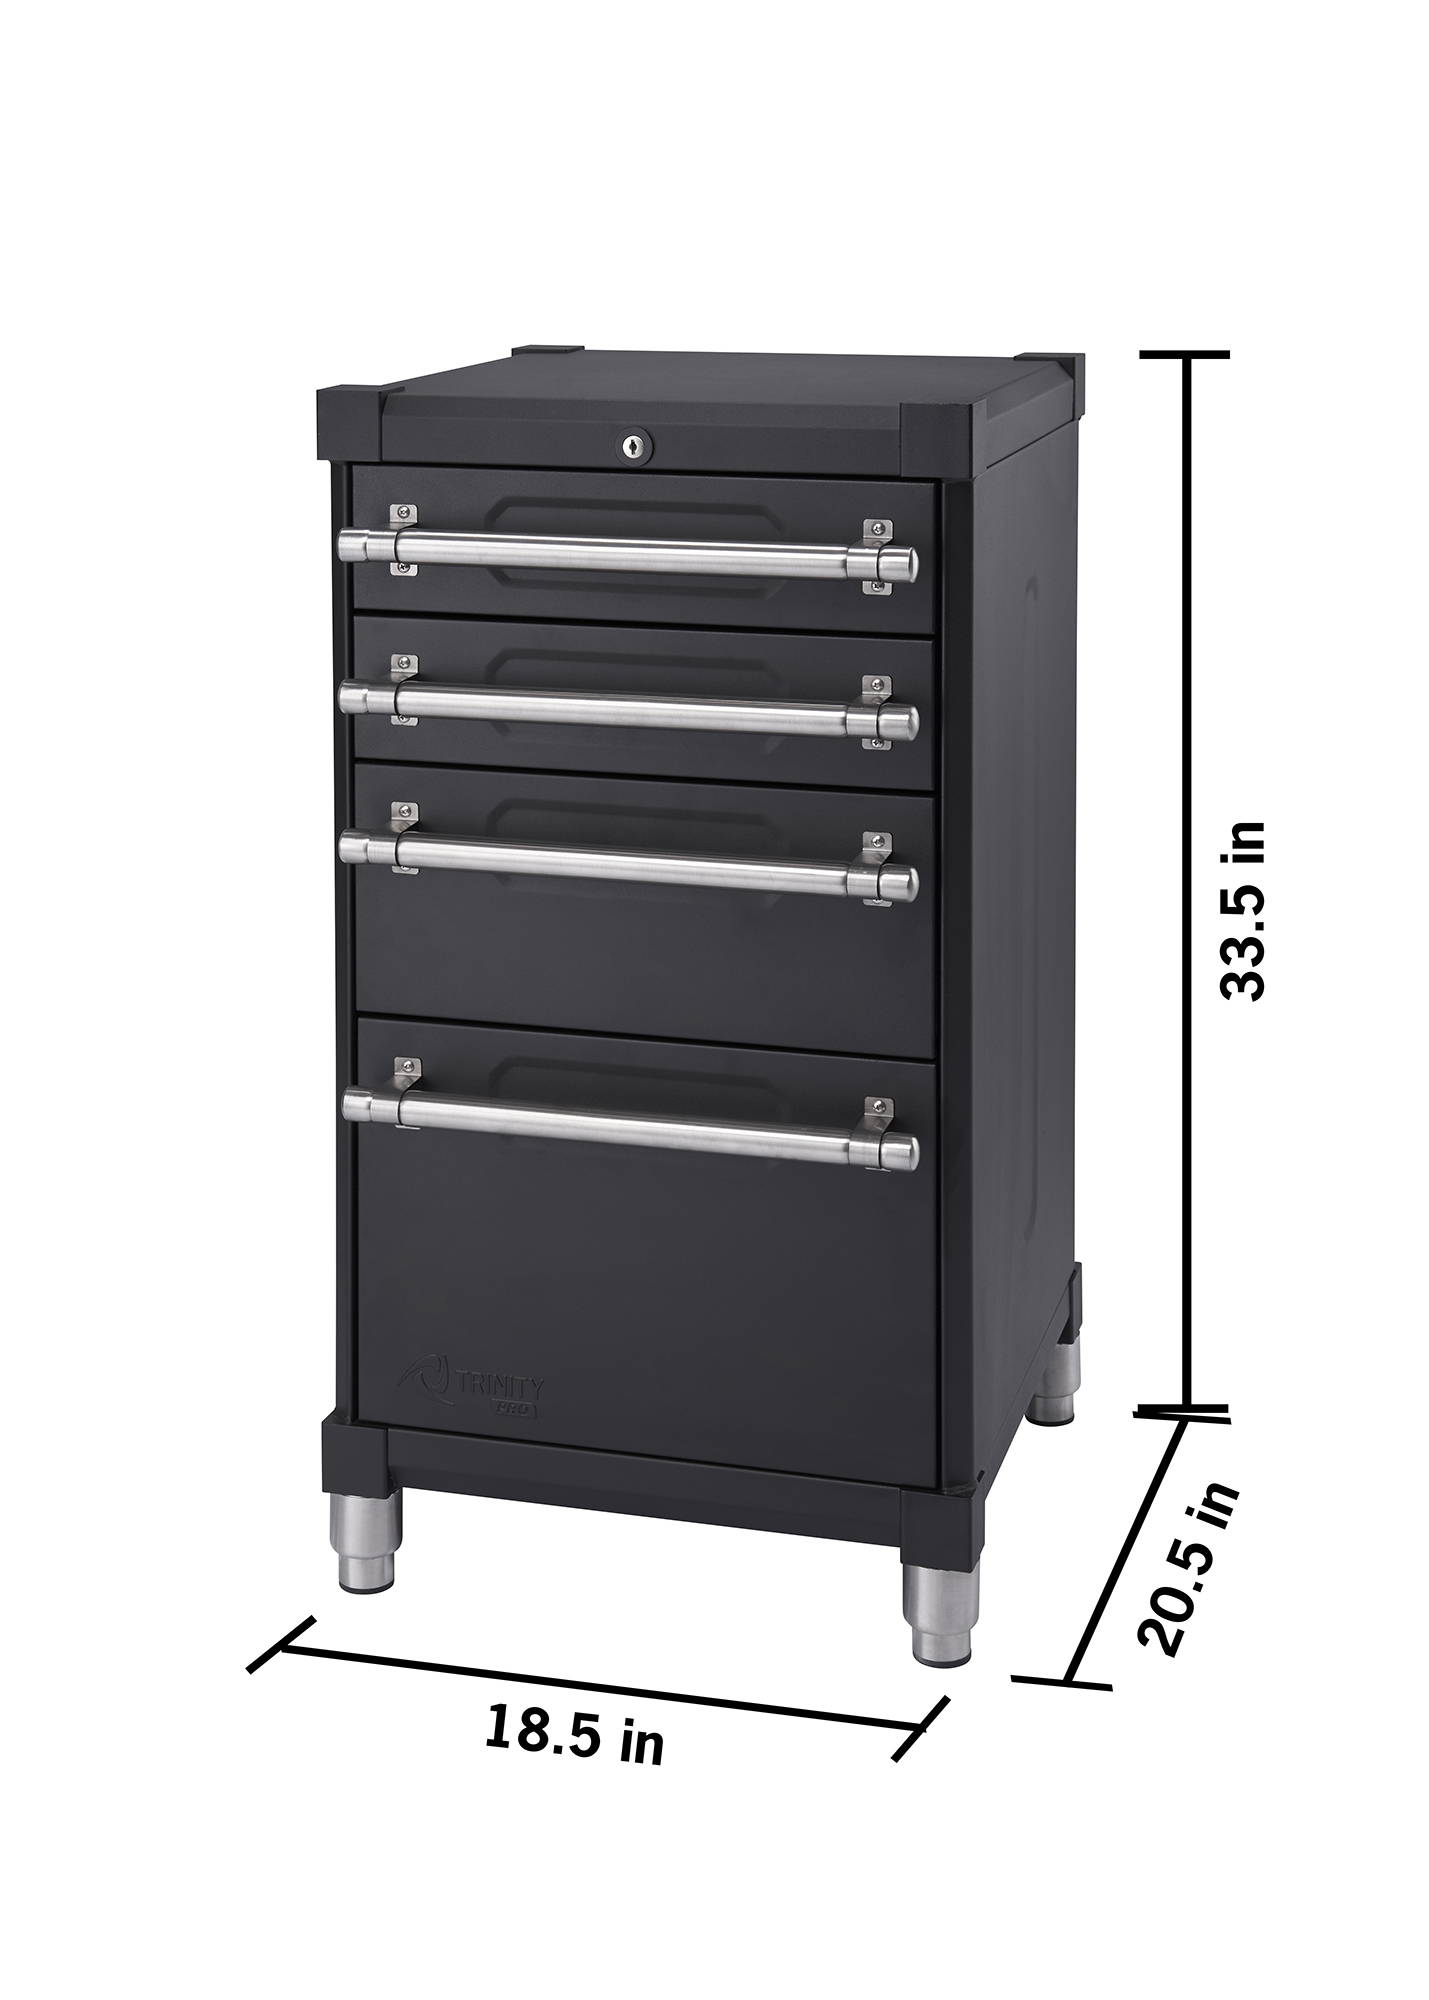 assembled 18.5 inches wide base cabient with drawers